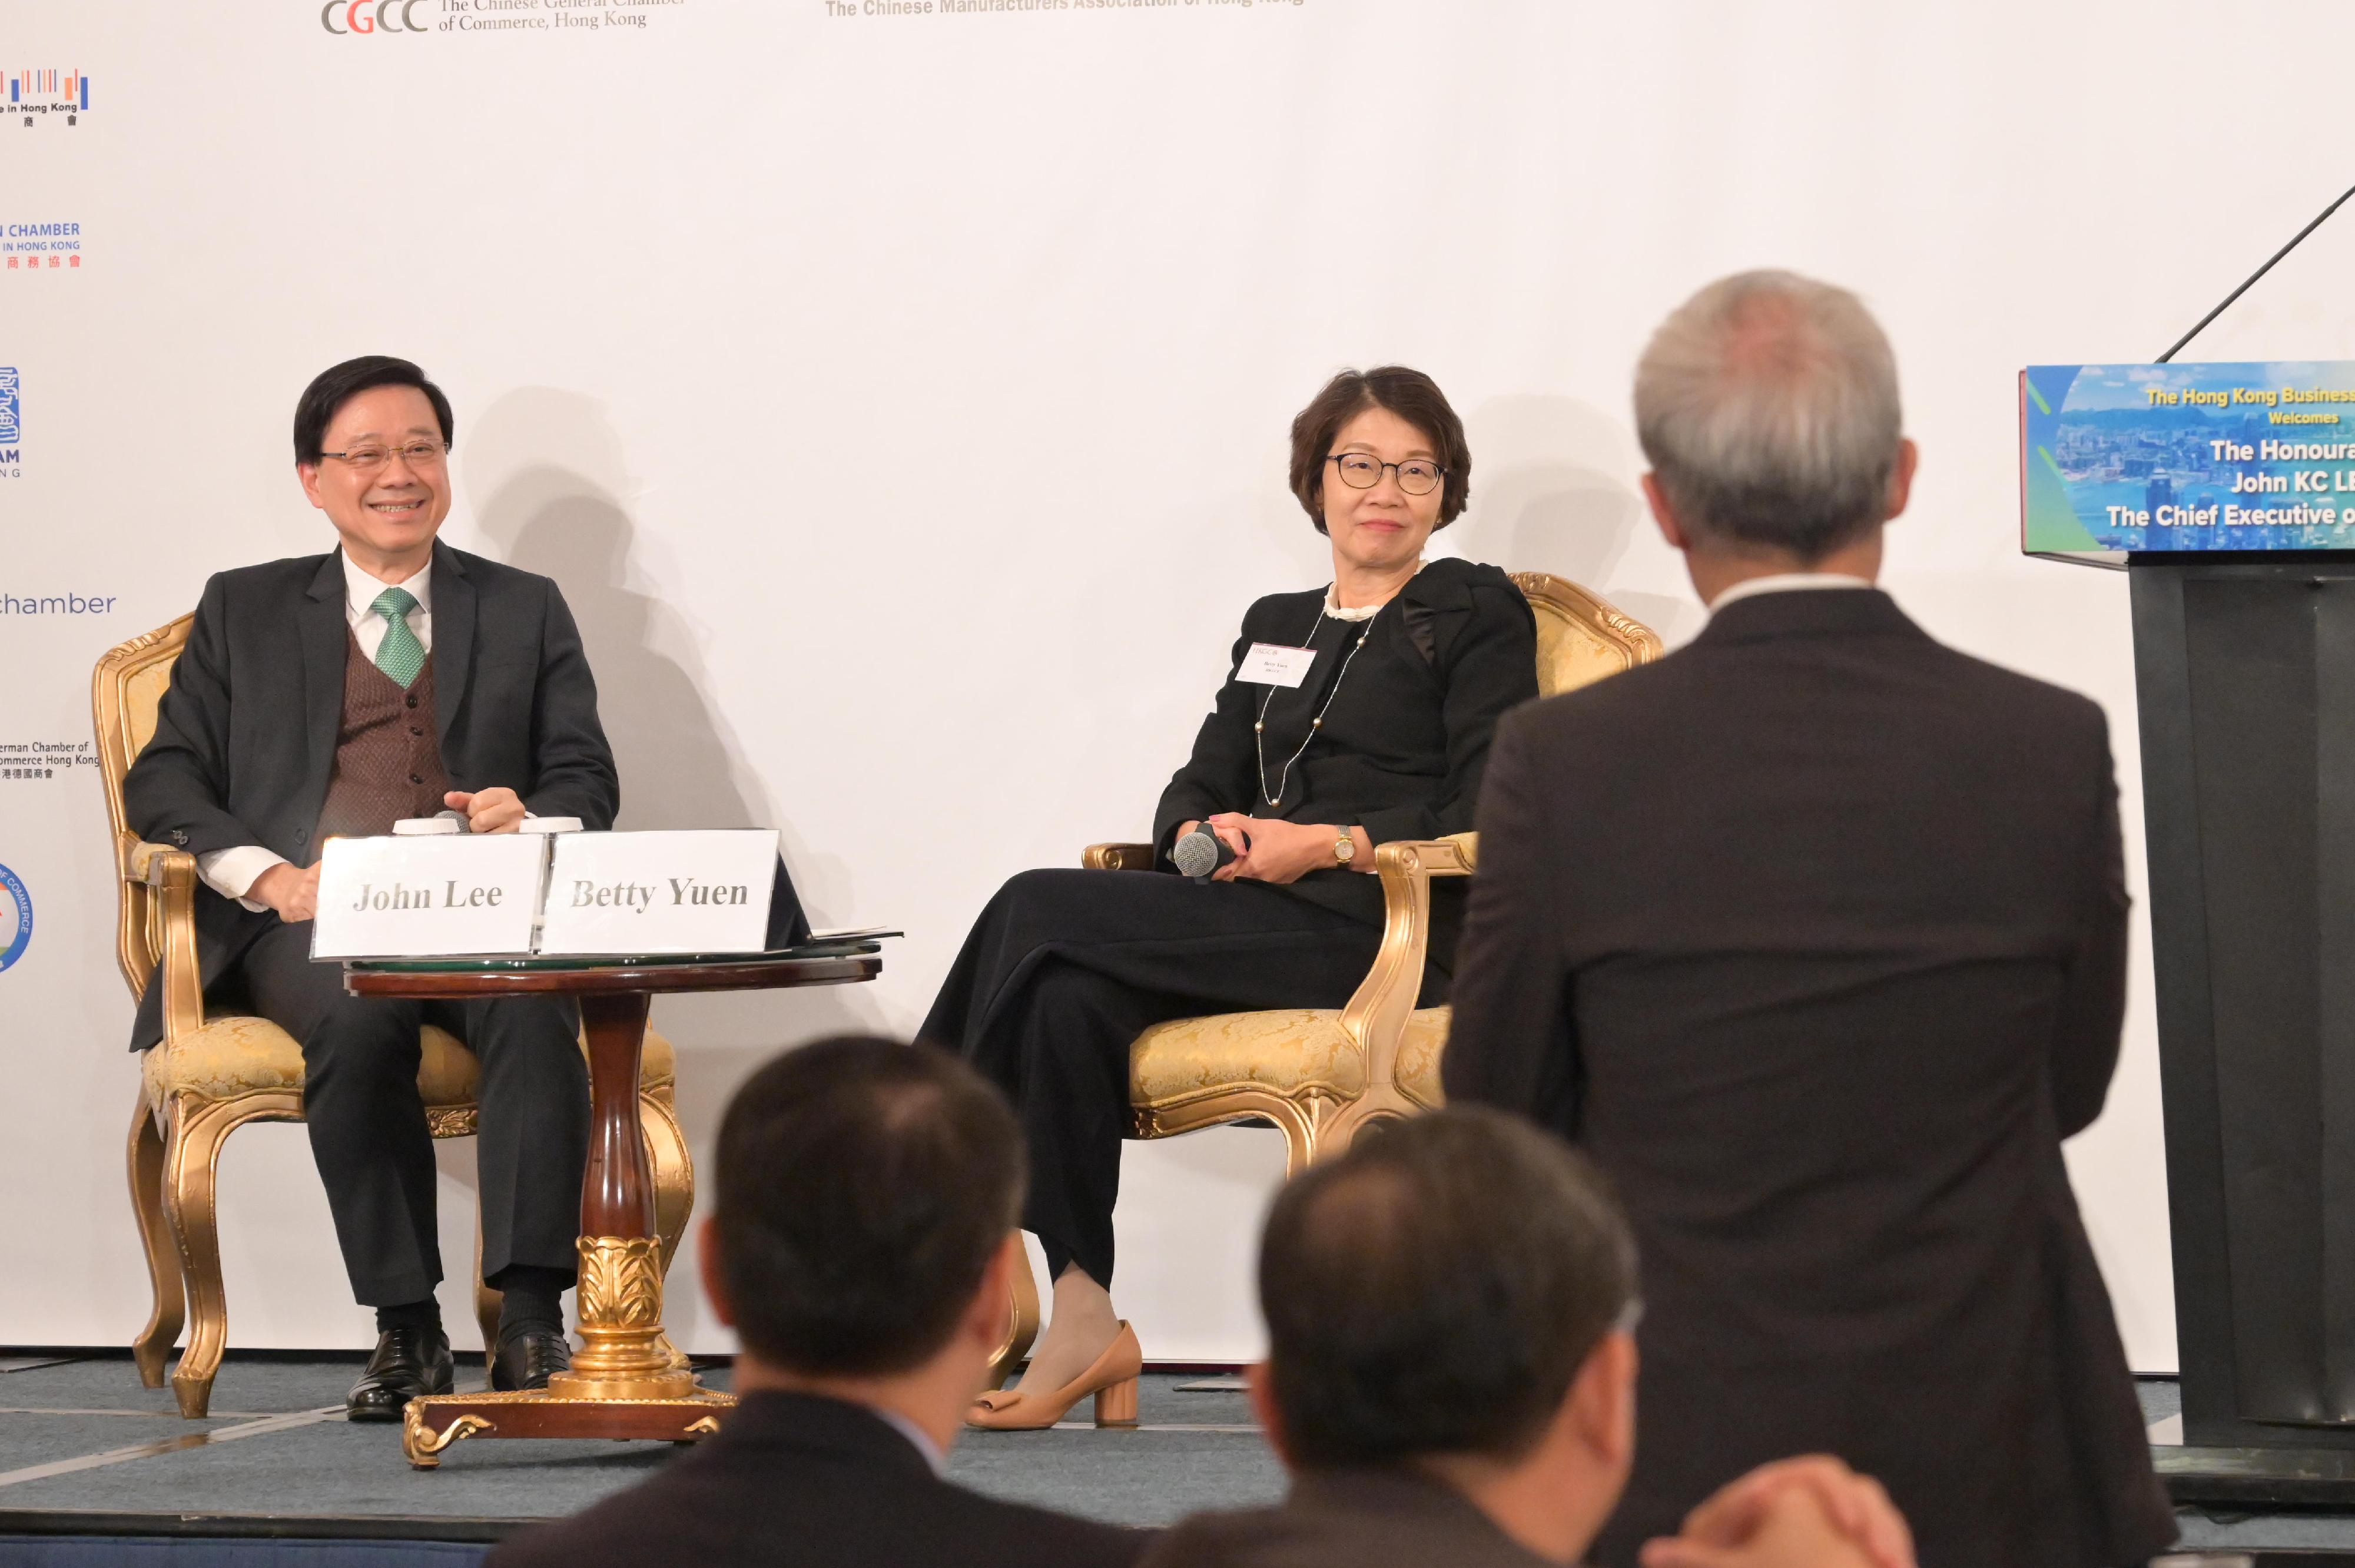 The Chief Executive, Mr John Lee (left), attends the Joint Business Community Luncheon today (November 16). Looking on is the Chairman of the Hong Kong General Chamber of Commerce, Mrs Betty Yuen (right).